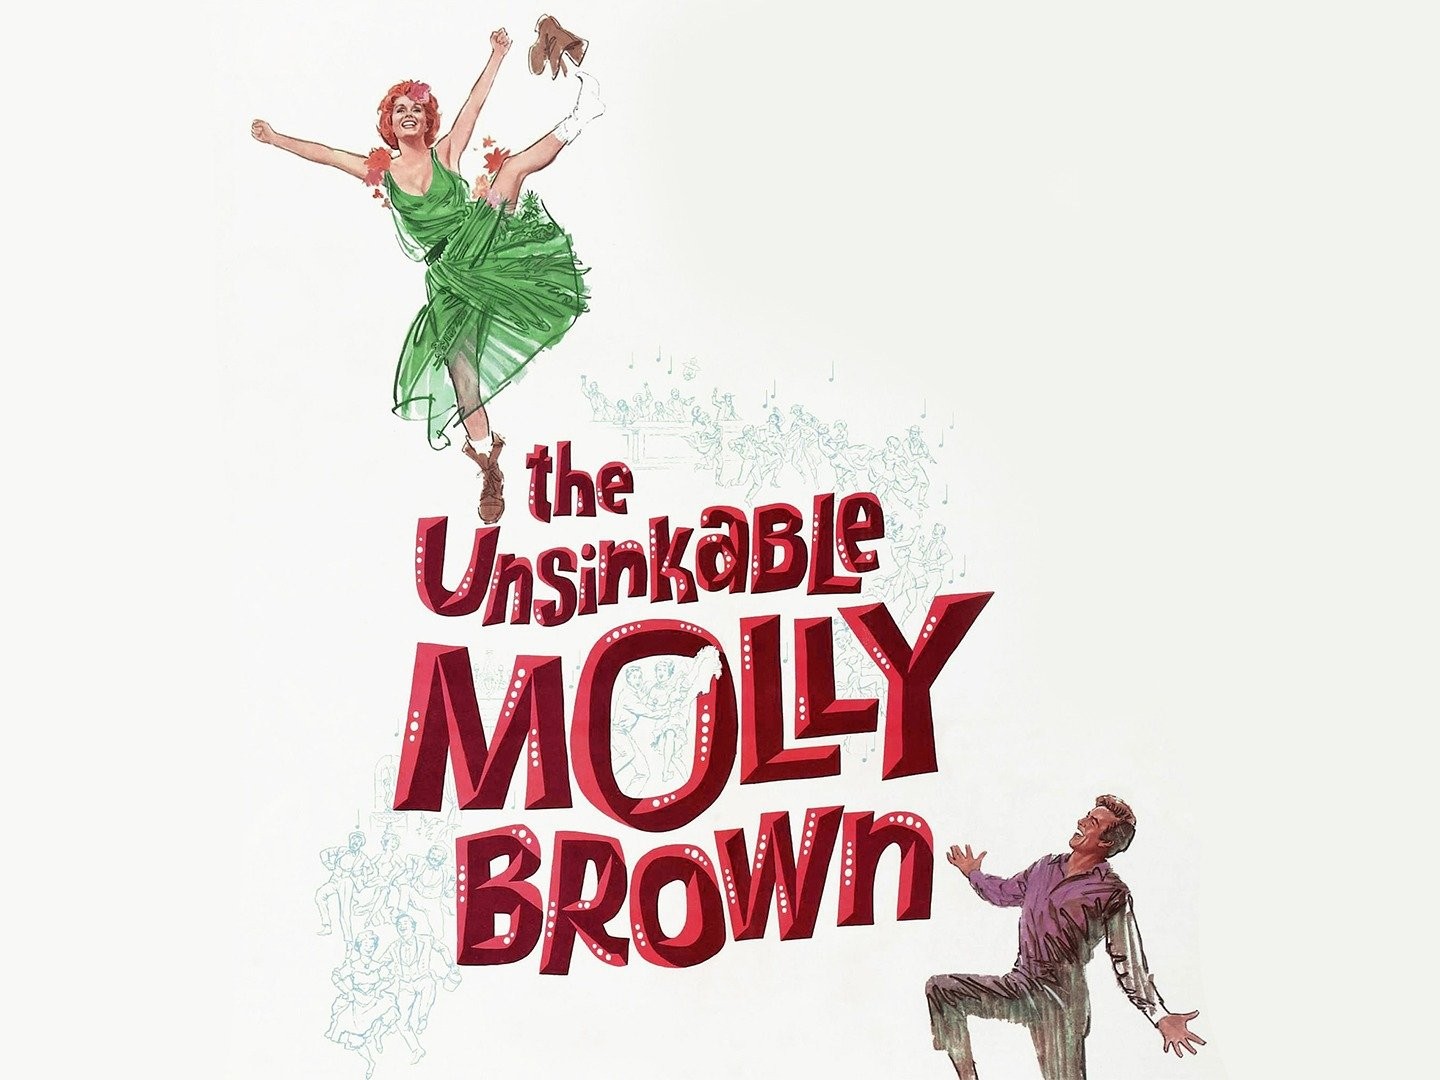 Who Was the Unsinkable Molly Brown?